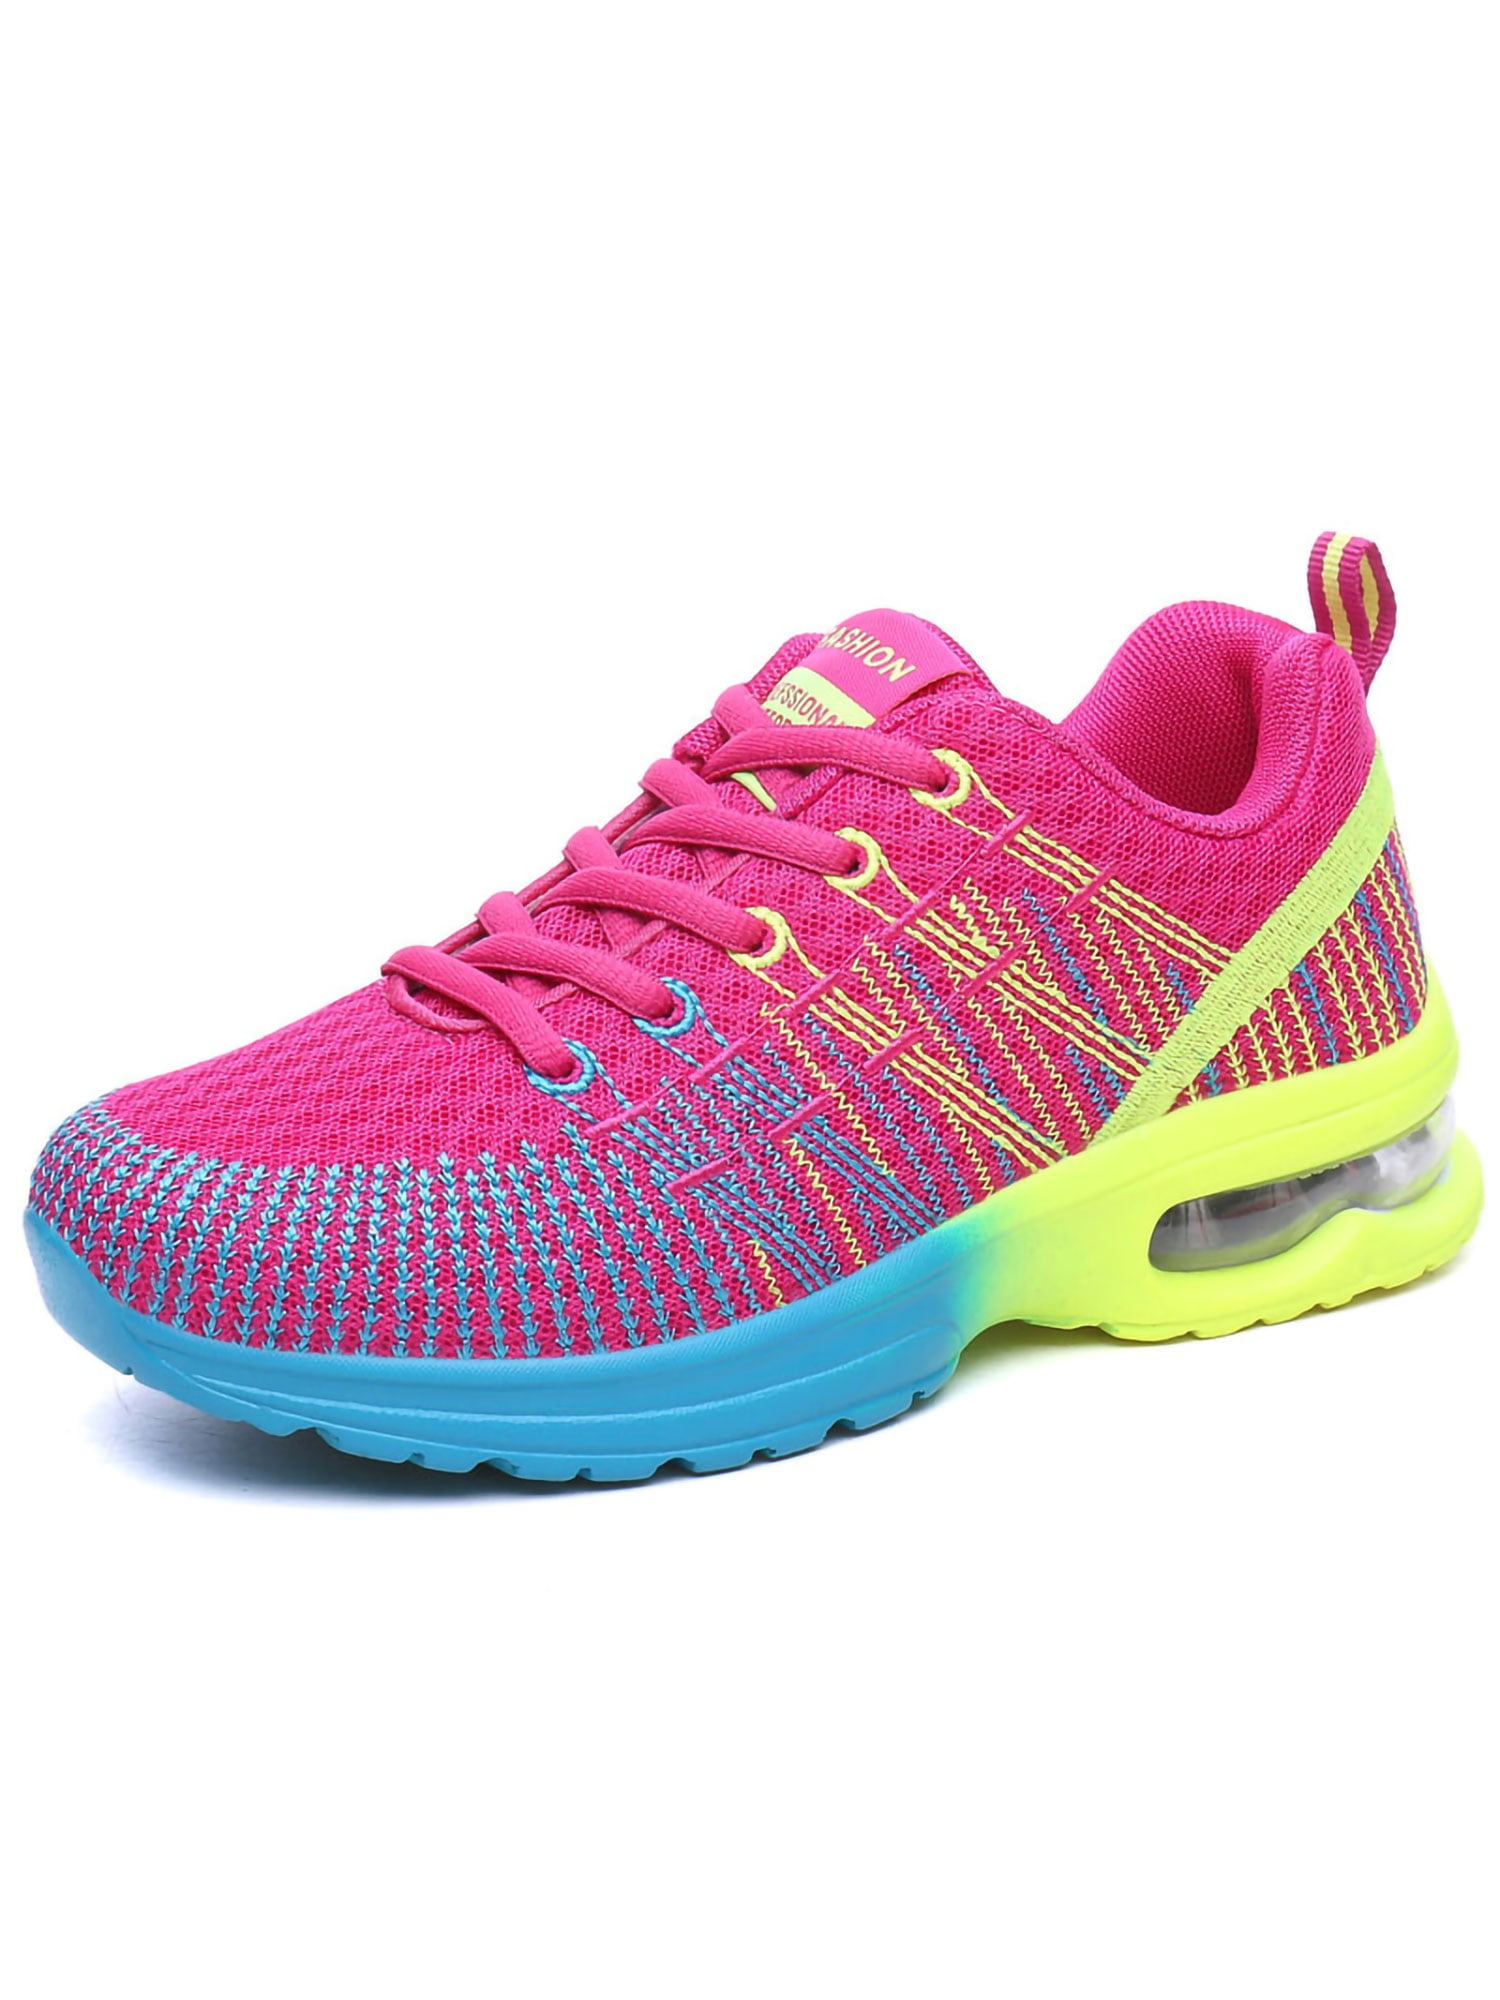 Women Trainers Running Shoes Air Cushion Sneakers Walking Athletic Shock Absorbing Lightweight Jogging Womens Sport Shoe 